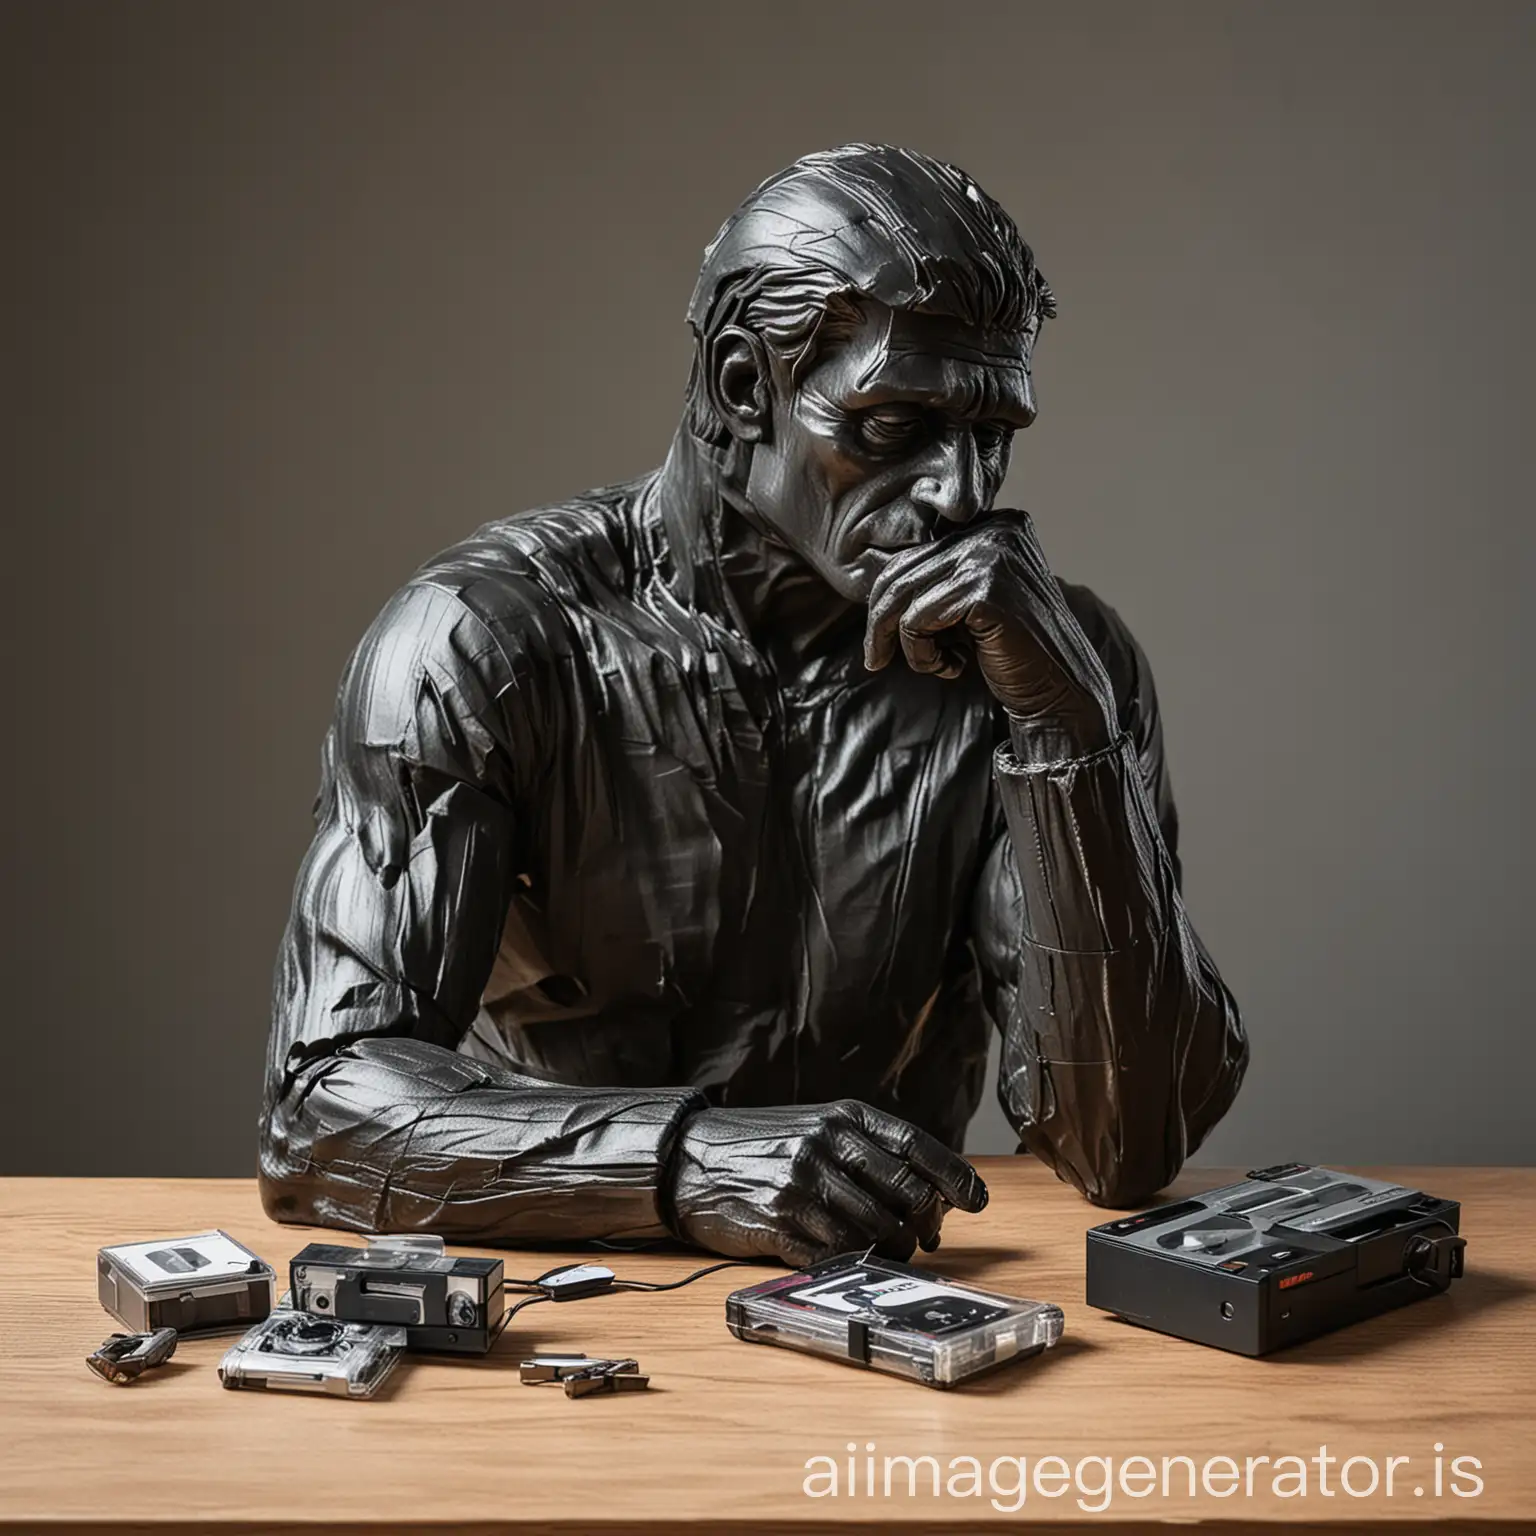 the thinker listening to a cassette tape on a table